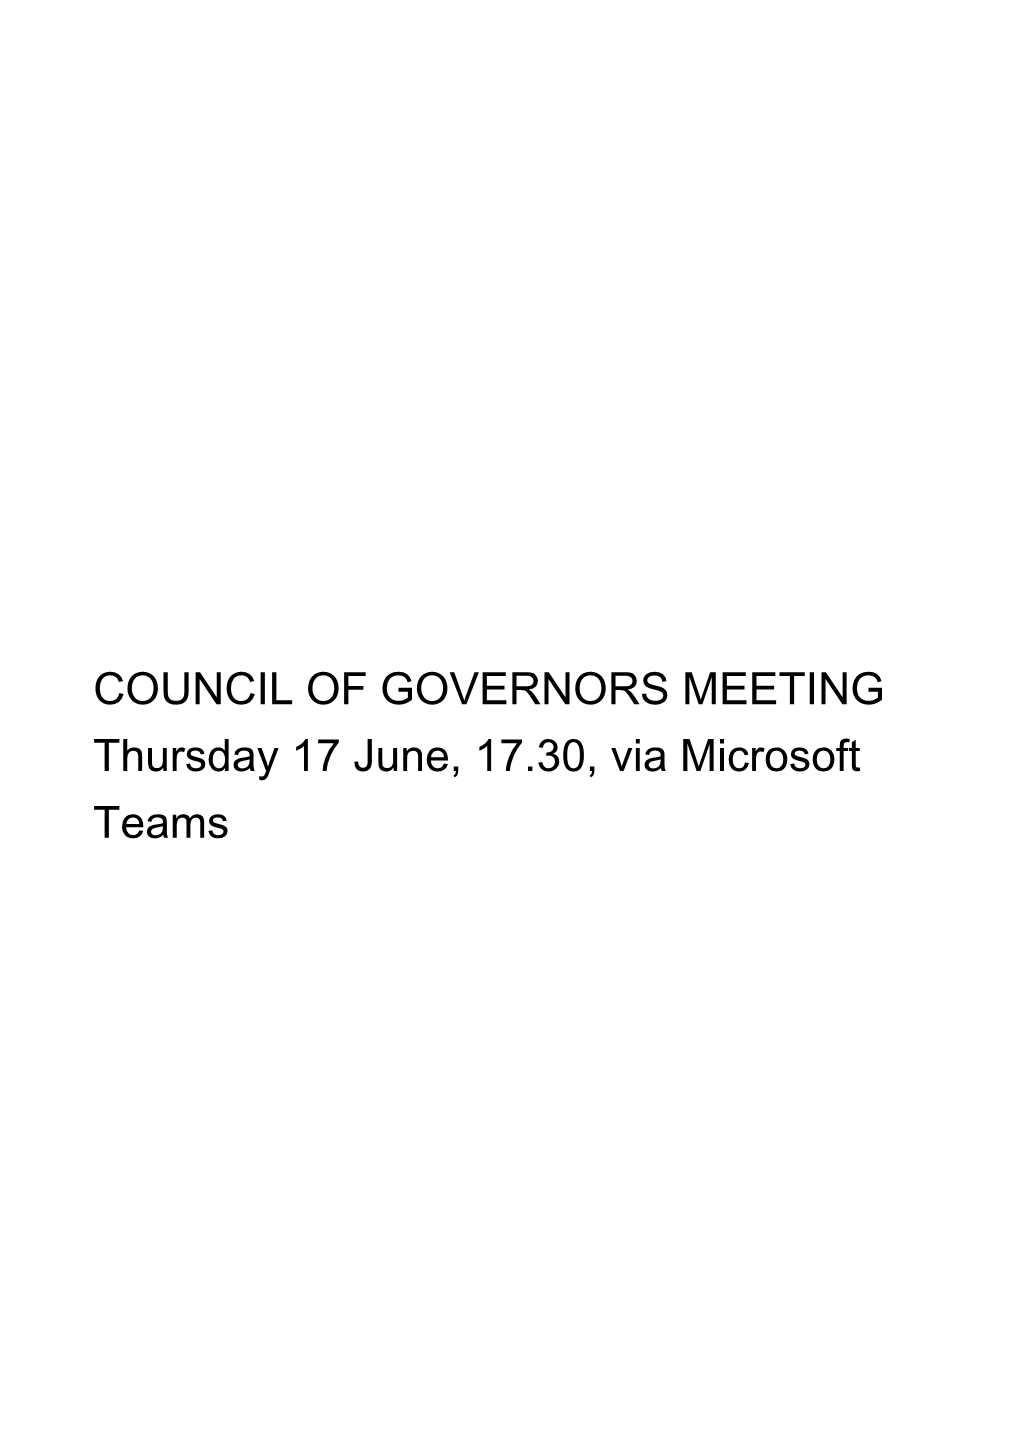 Agenda and Papers for Cog Meeting